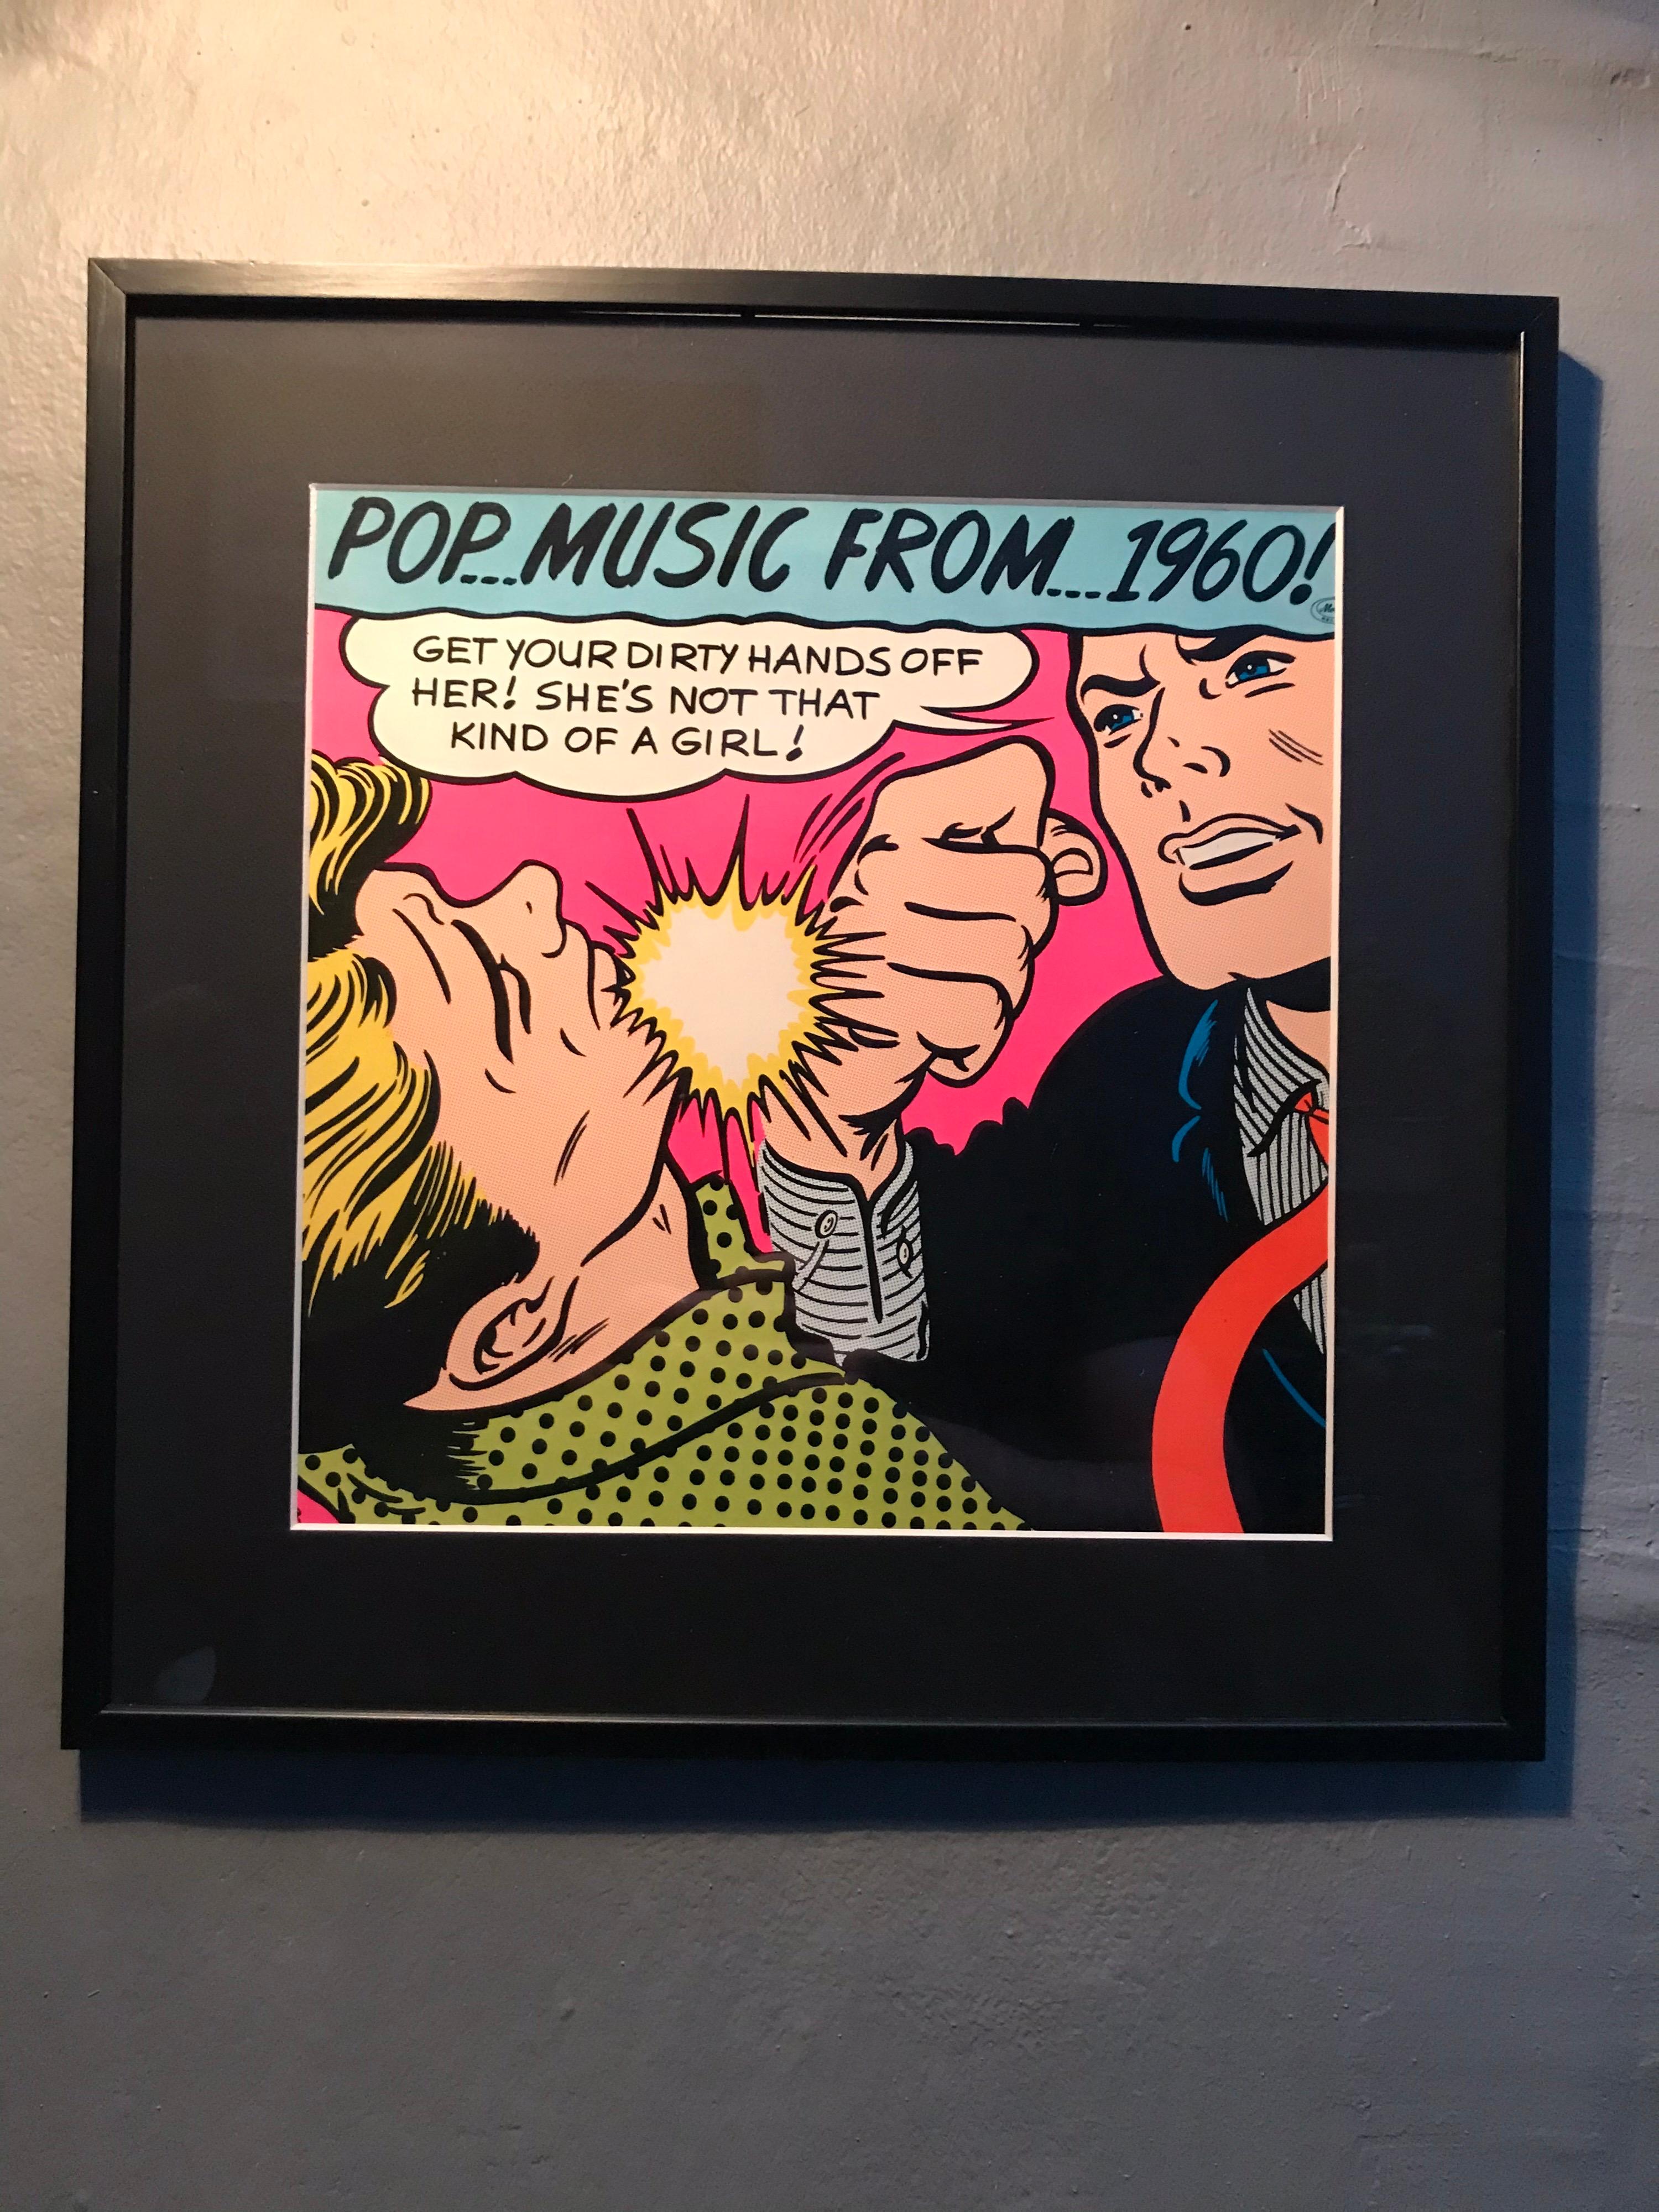 A vintage set of 10 framed Pop Music from 1960-1969 pop art LP covers.
This set of 10 LP’s were released by Mercury Records in 1982 in Sweden.
It is rare to see a whole set and it has taken me a year to find and collect all 10.
Now they are